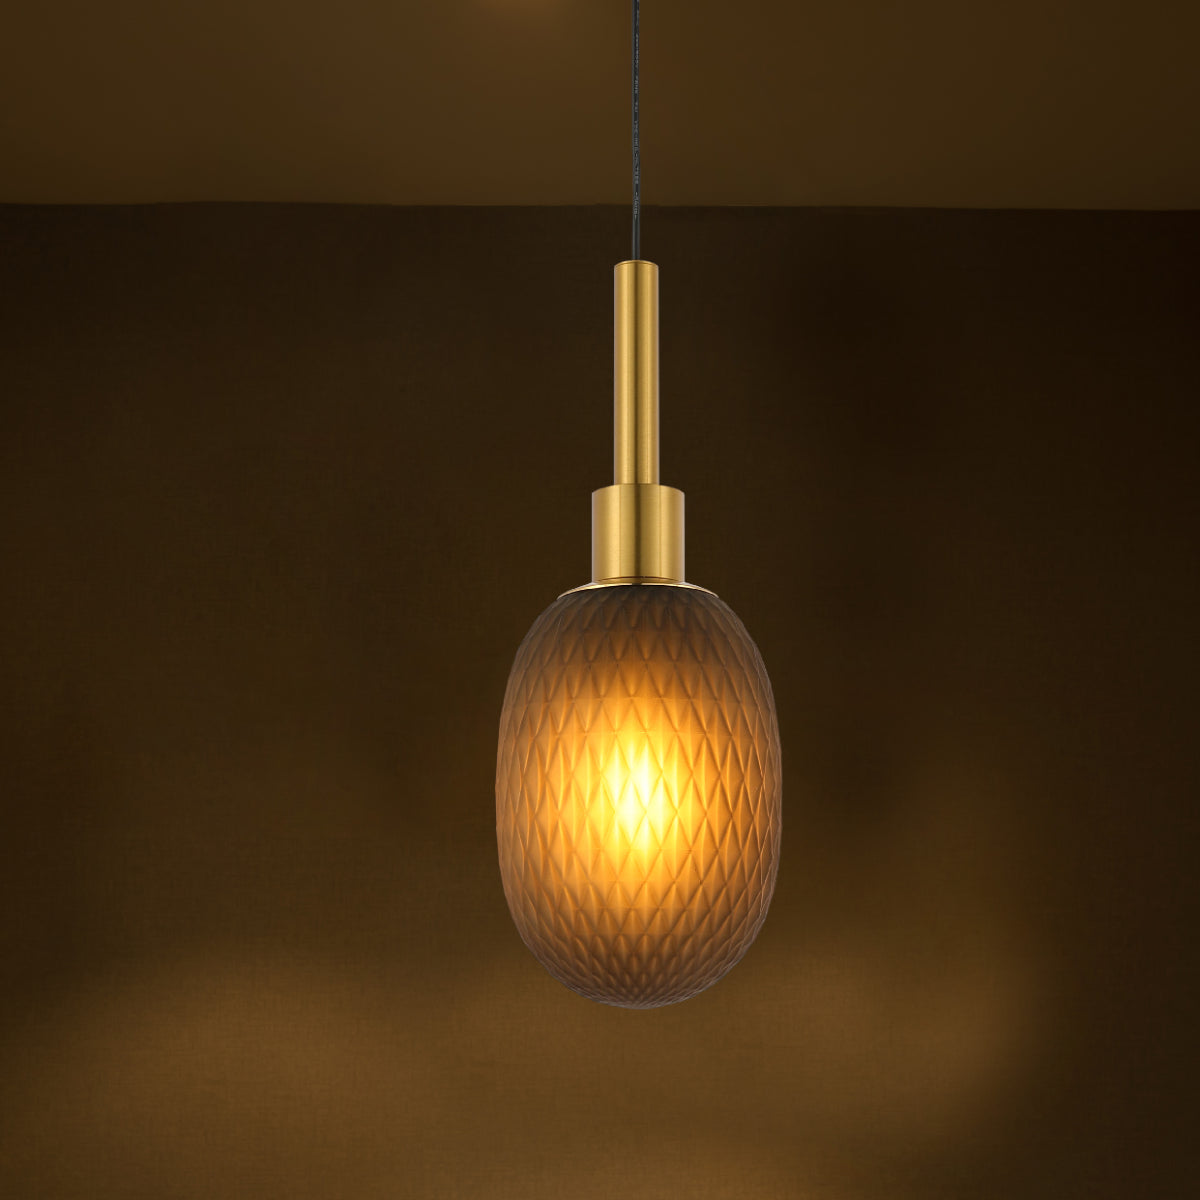 Usage of Opalescent Ellipsoid Pendant Light with Gold Detail 150-19016